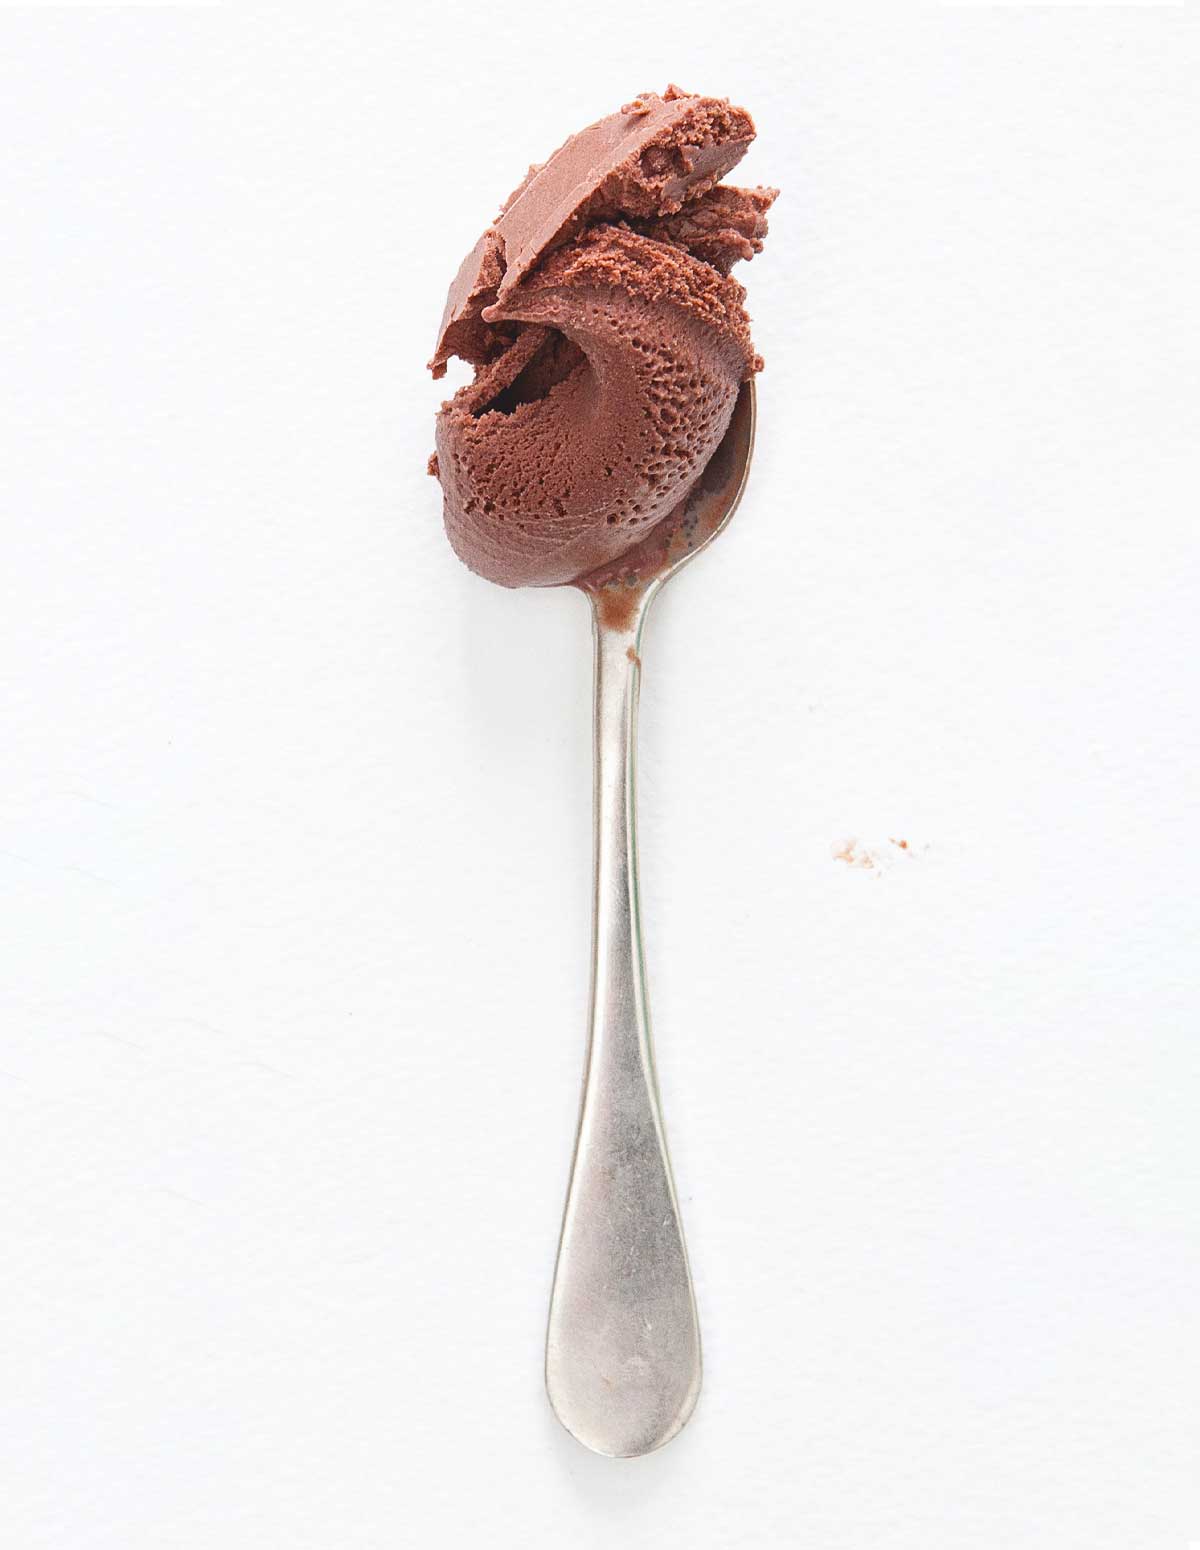 A spoonful of chocolate ice cream.